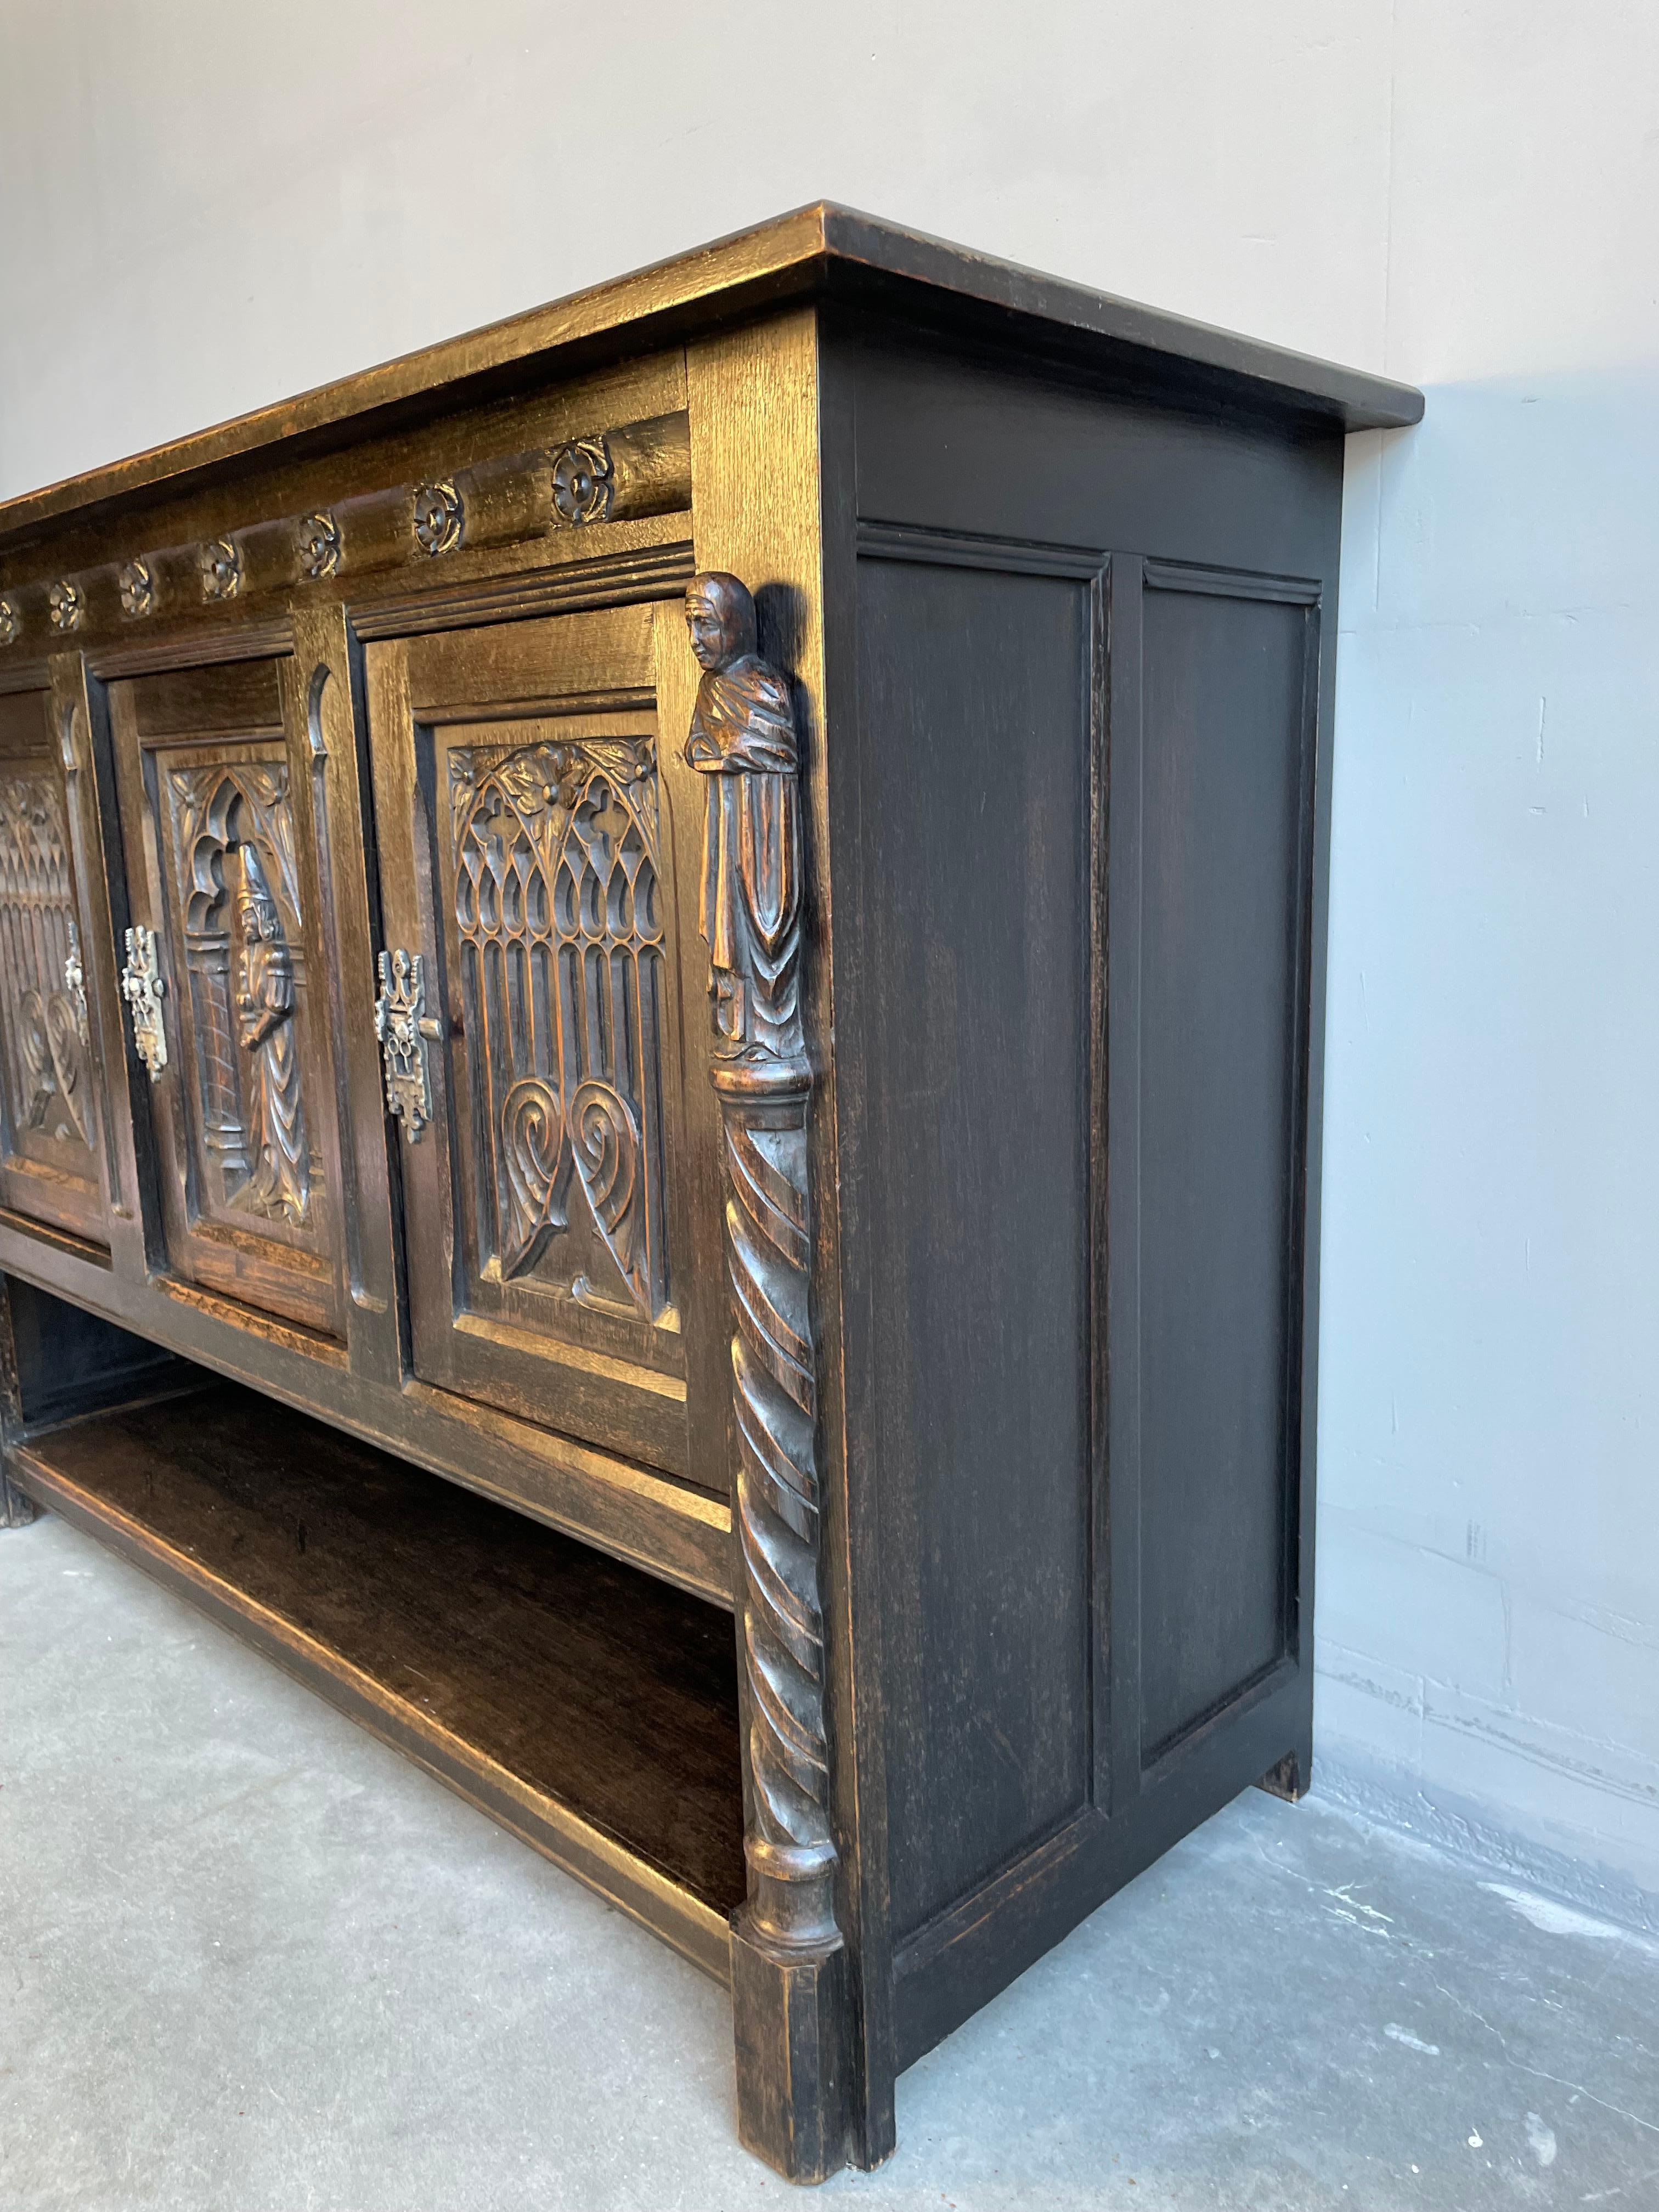 Early 1900s, solid oak, and very rare Gothic cabinet.

This beautifully and deeply carved oak sideboard from the early 1900s is in amazing condition. We have owned and sold our fair share of antique Gothic furniture, but never before have we seen an